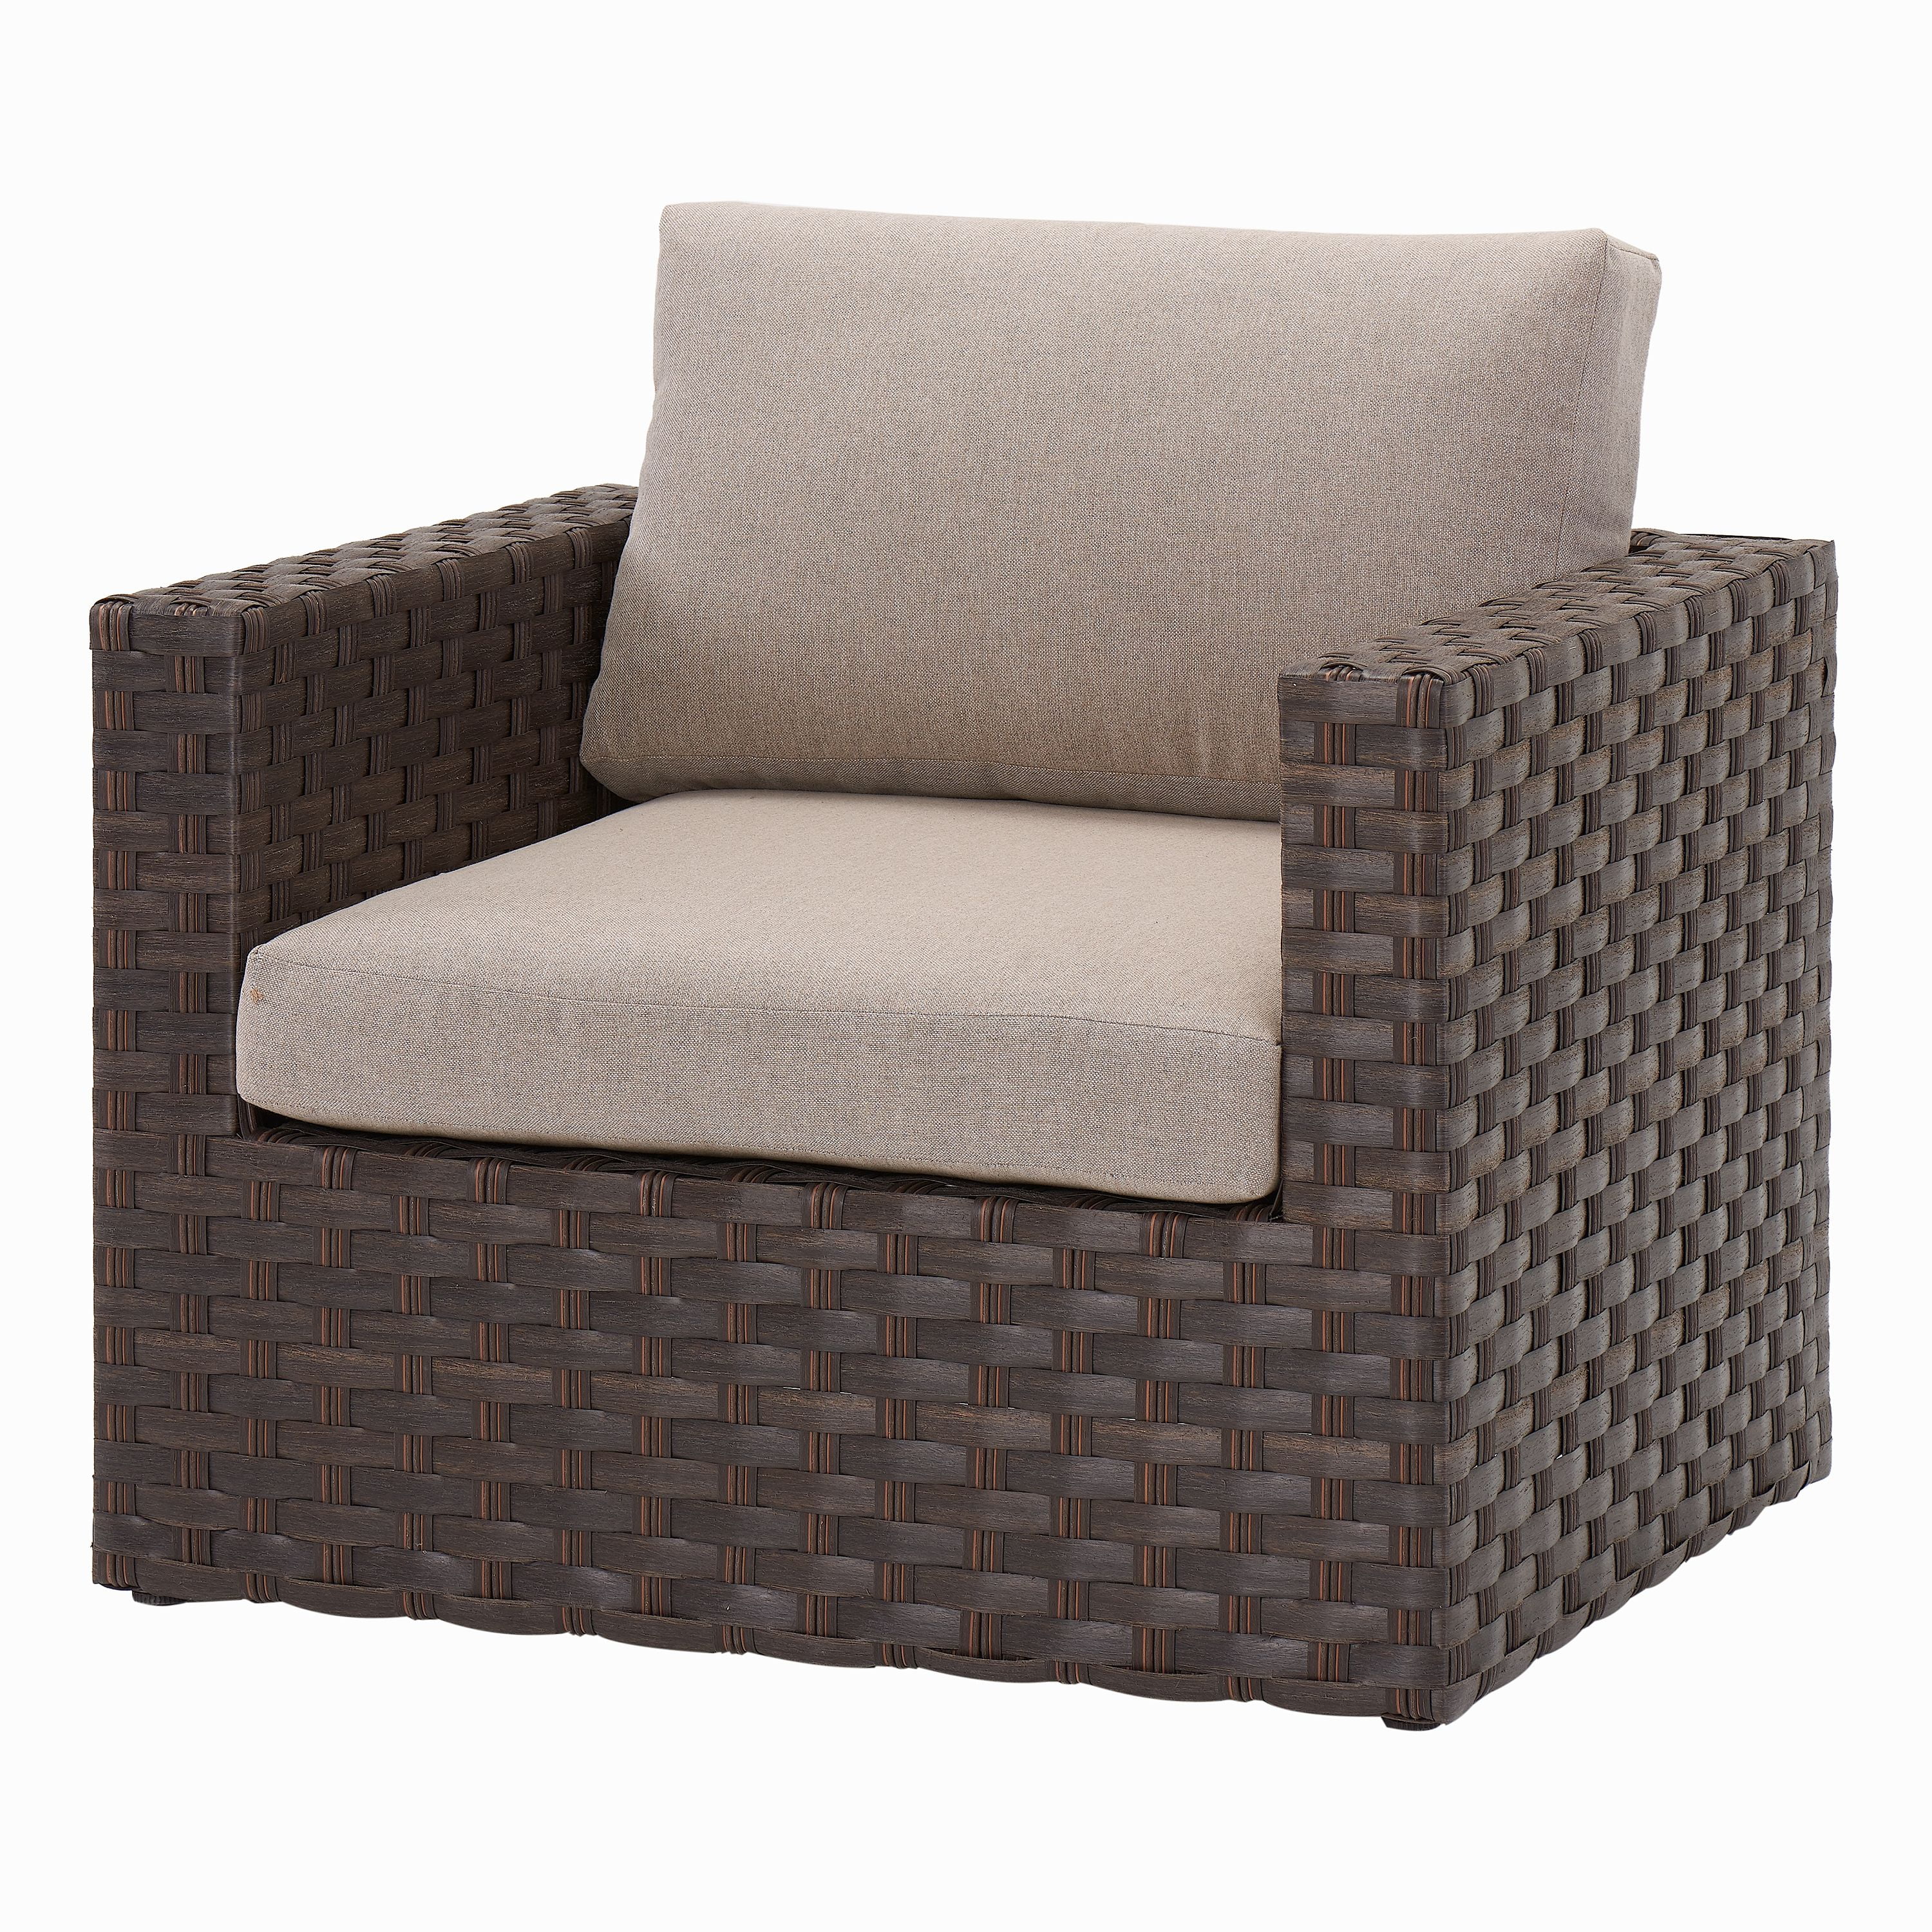 Better Homes Gardens Harbor City Patio Lounge Chair With